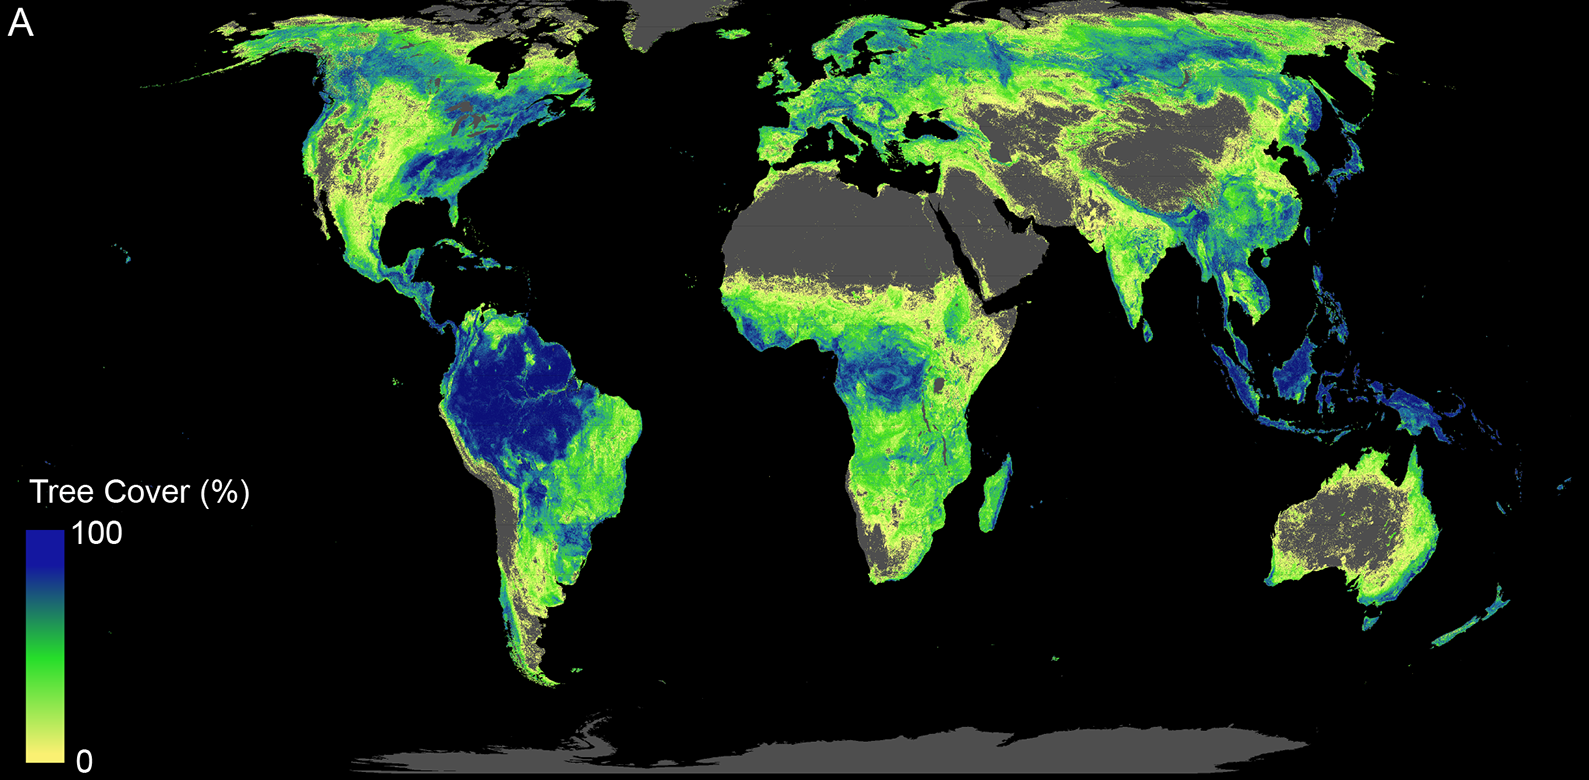 Total land available that can support trees across the globe